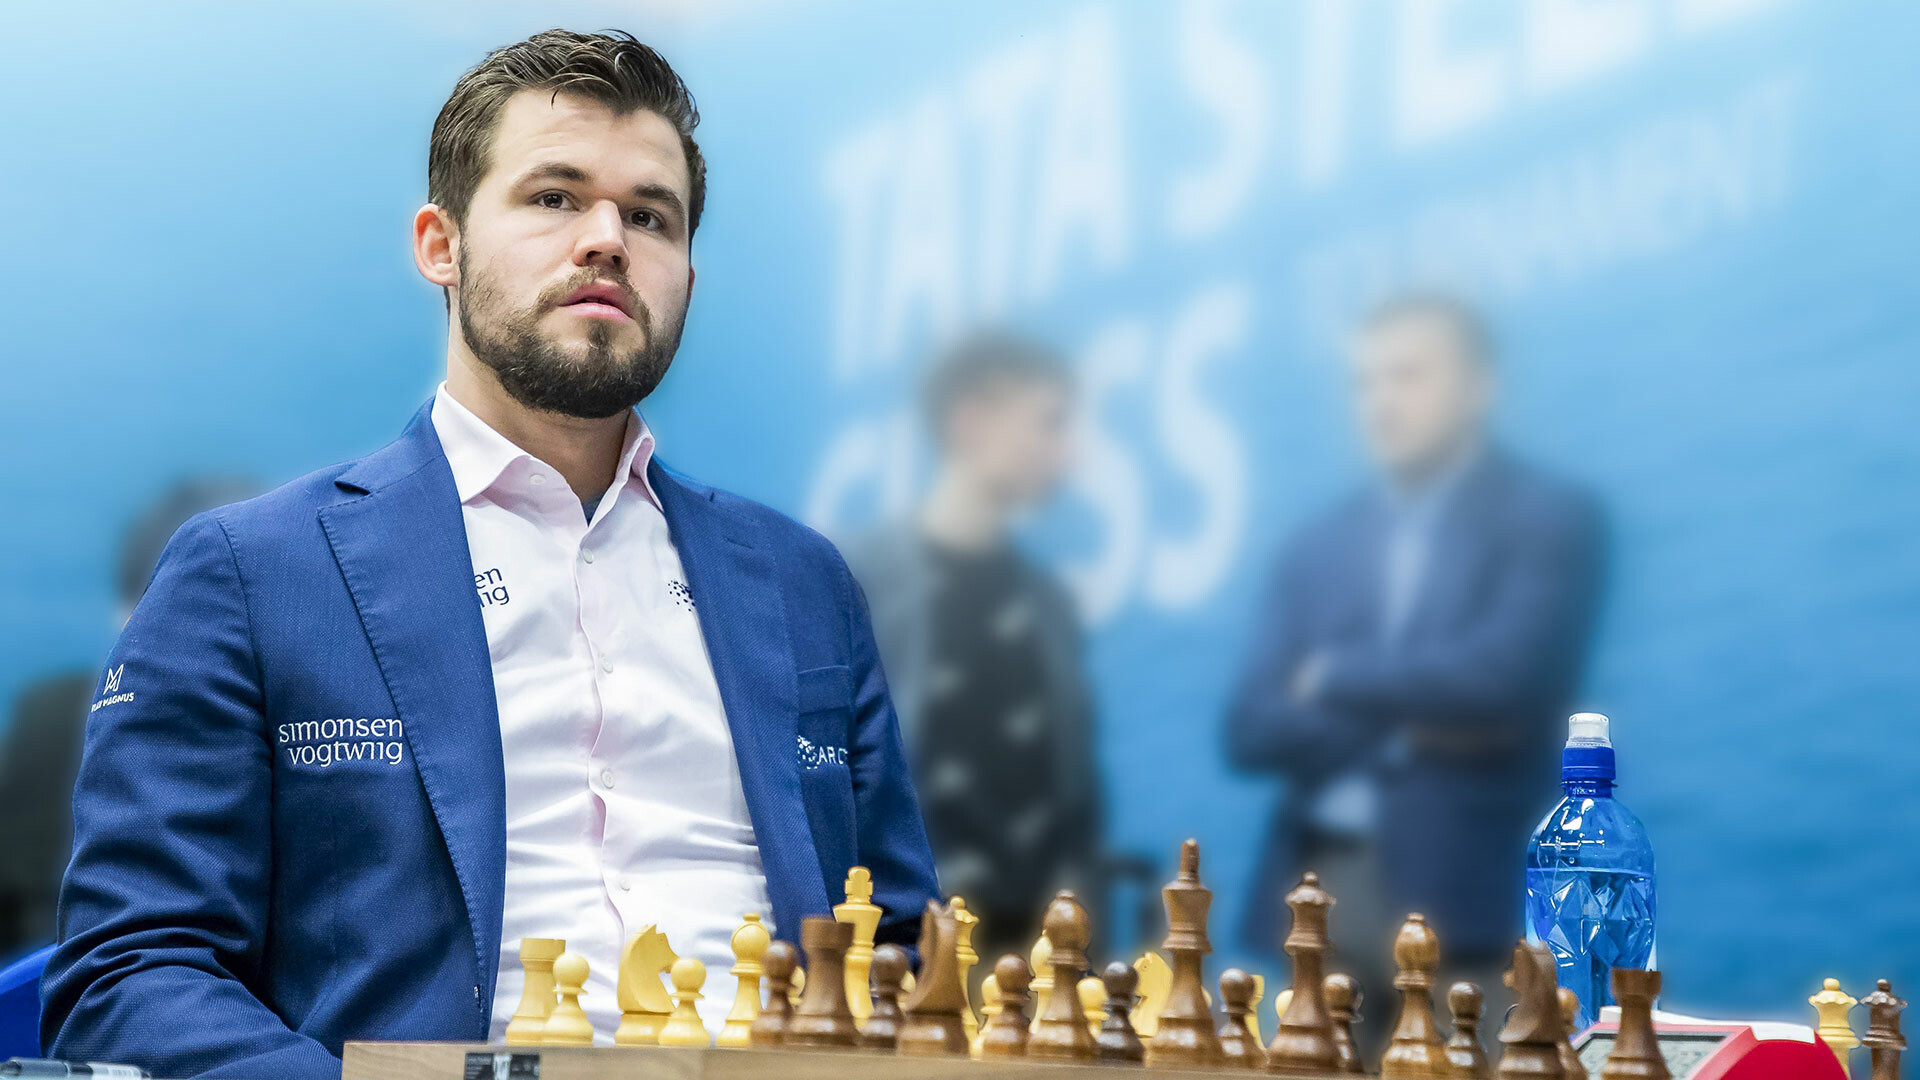 Magnus Carlsen: Won the Chess Oscars from 2009 to 2013, A Norwegian chess grandmaster. 1920x1080 Full HD Background.